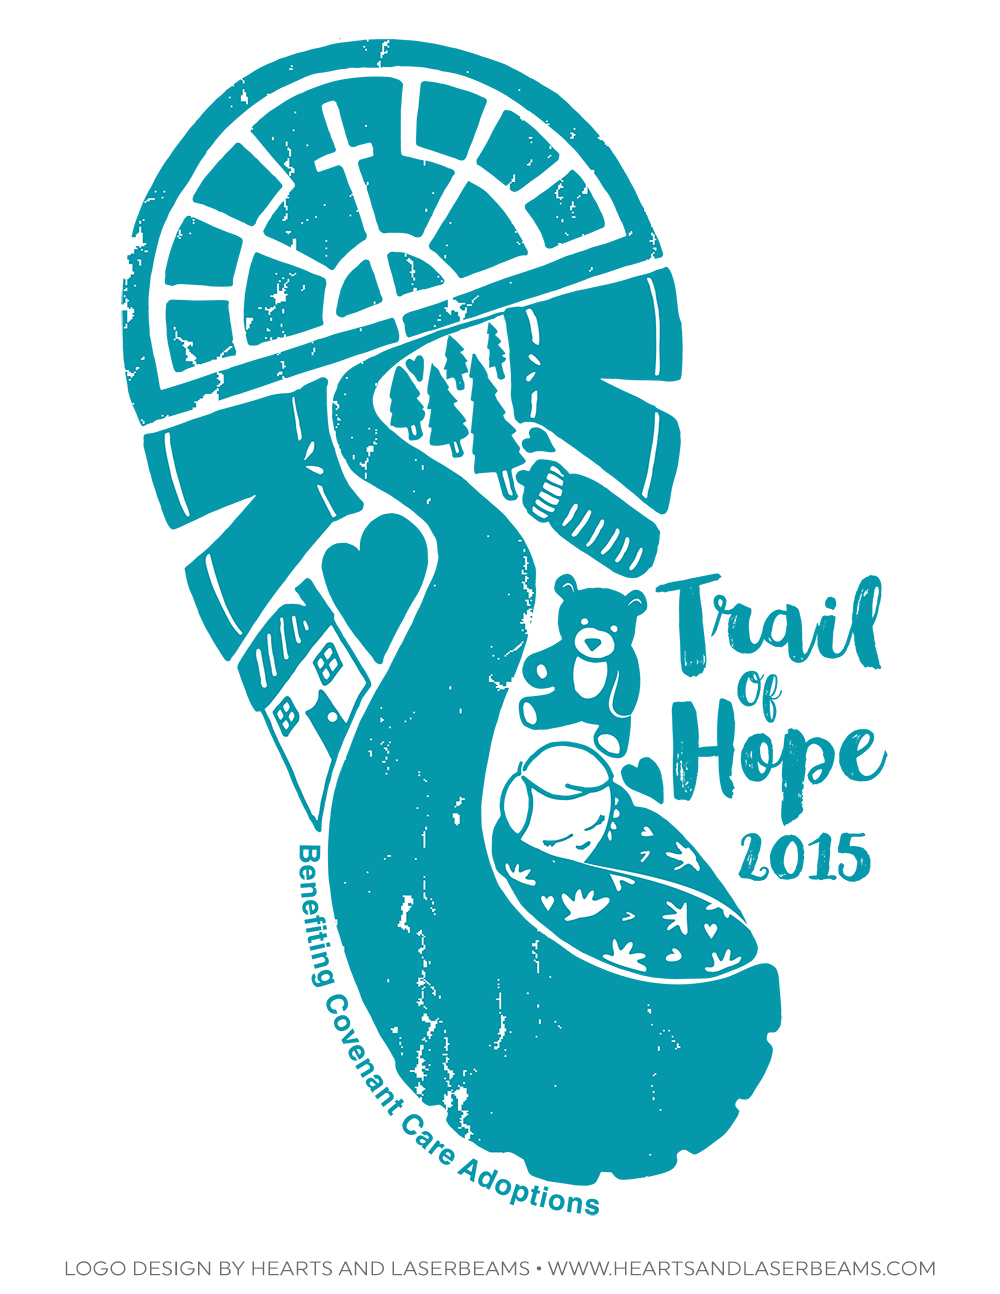 Cool 5k Race Logo Design for Trail of Hope run - Covenant Care Services in Savannah